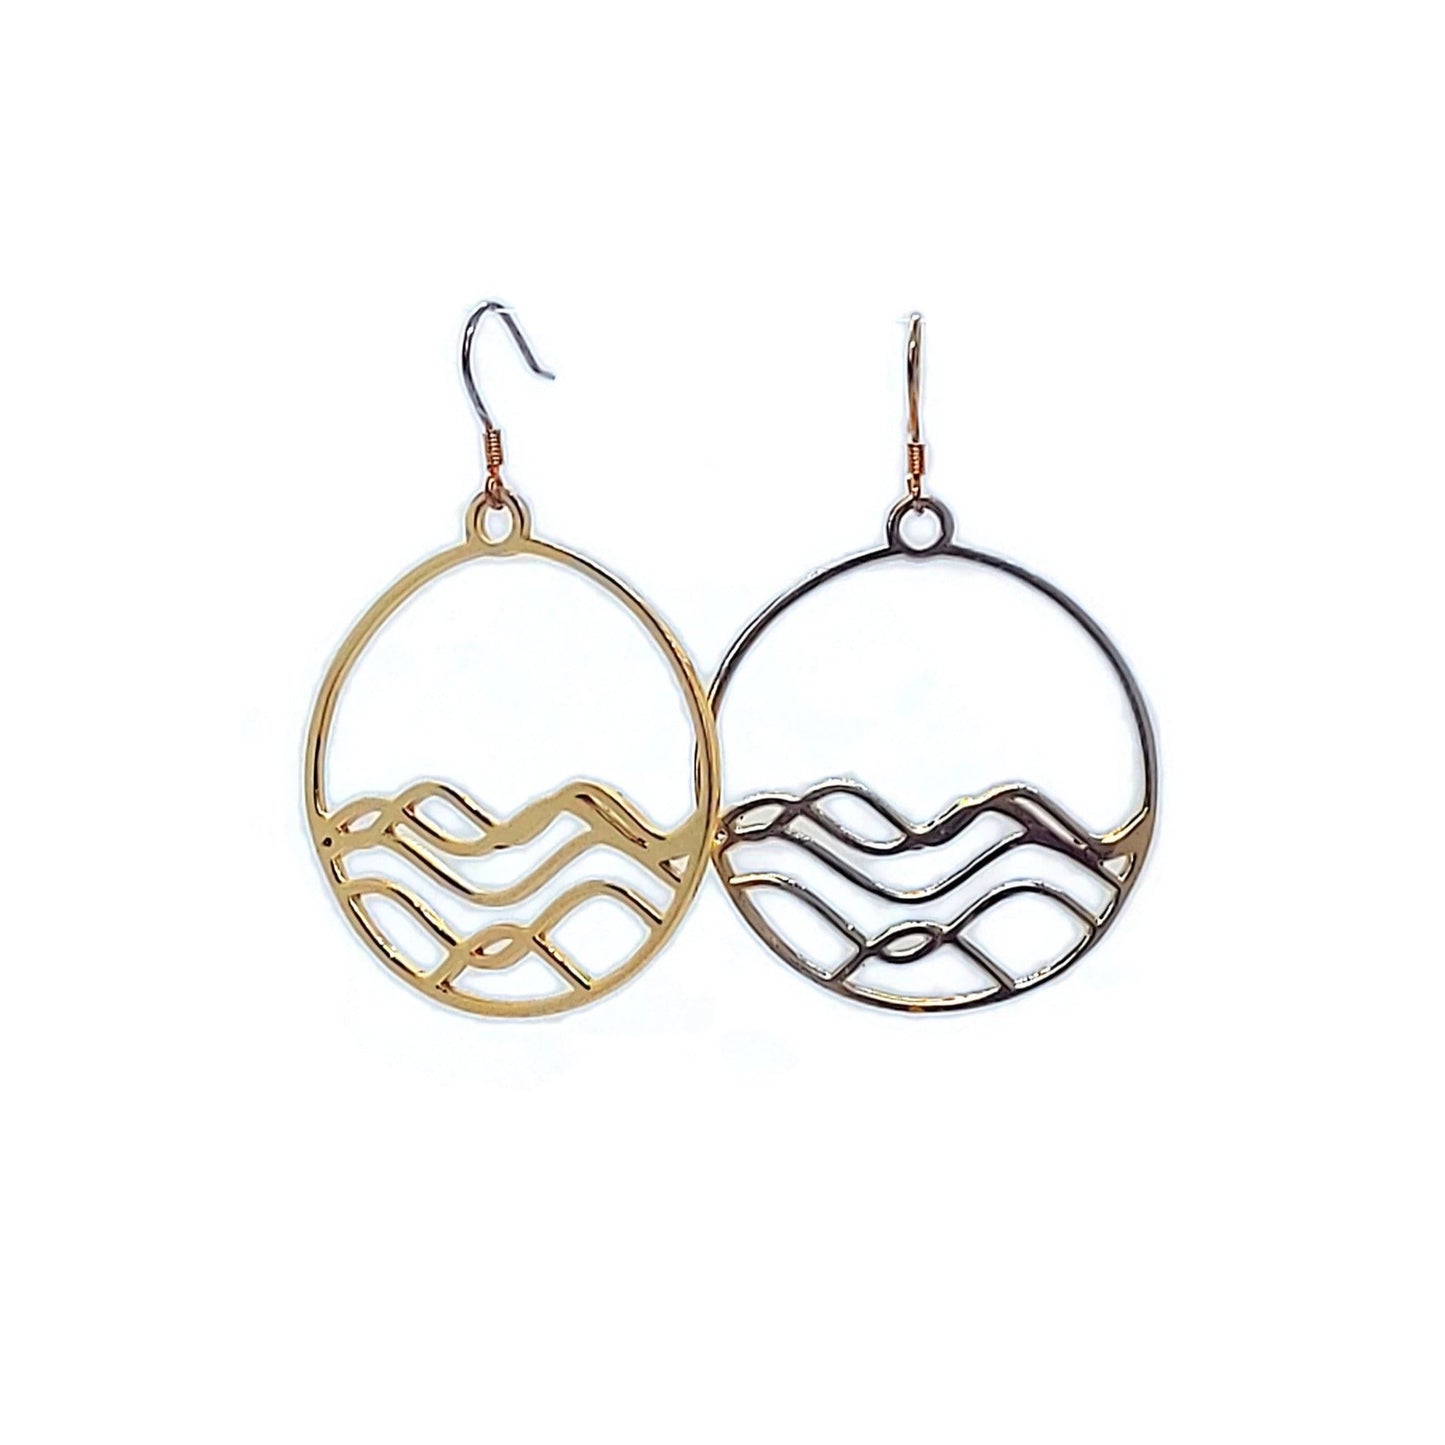 circle earrings, ocean jewelry, 18k plated yellow gold dangly earrings. Circles with waves in half the circle